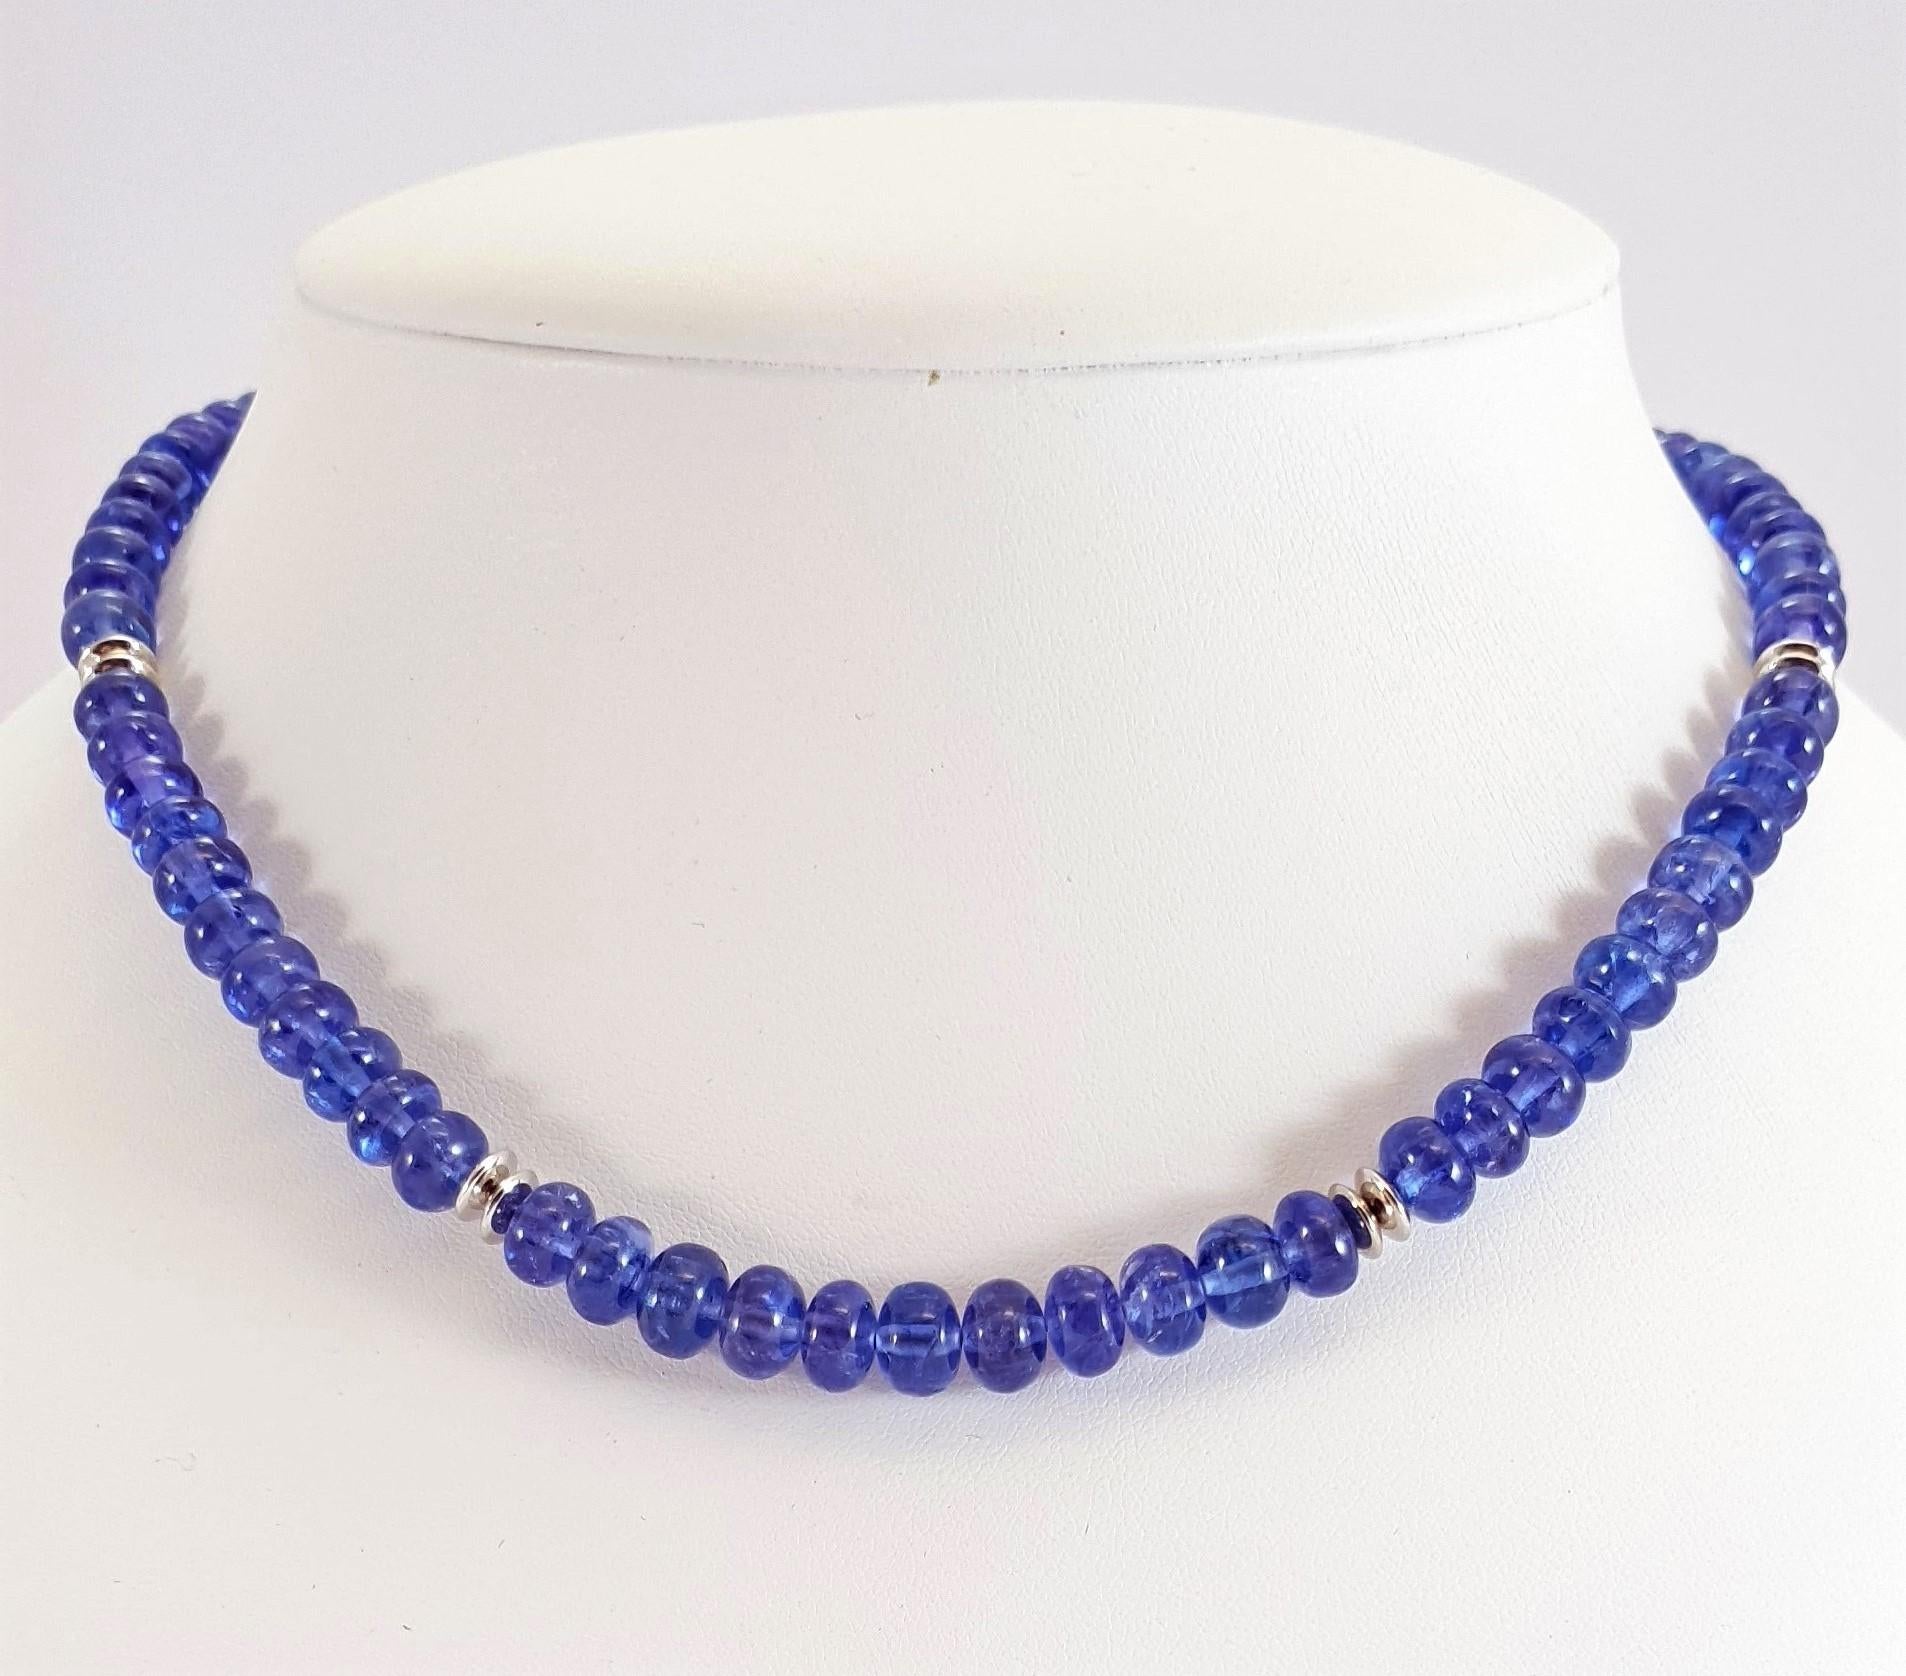 Cornflower Blue Tanzanite Rondel Beaded Necklace with 18 Carat White Gold 2